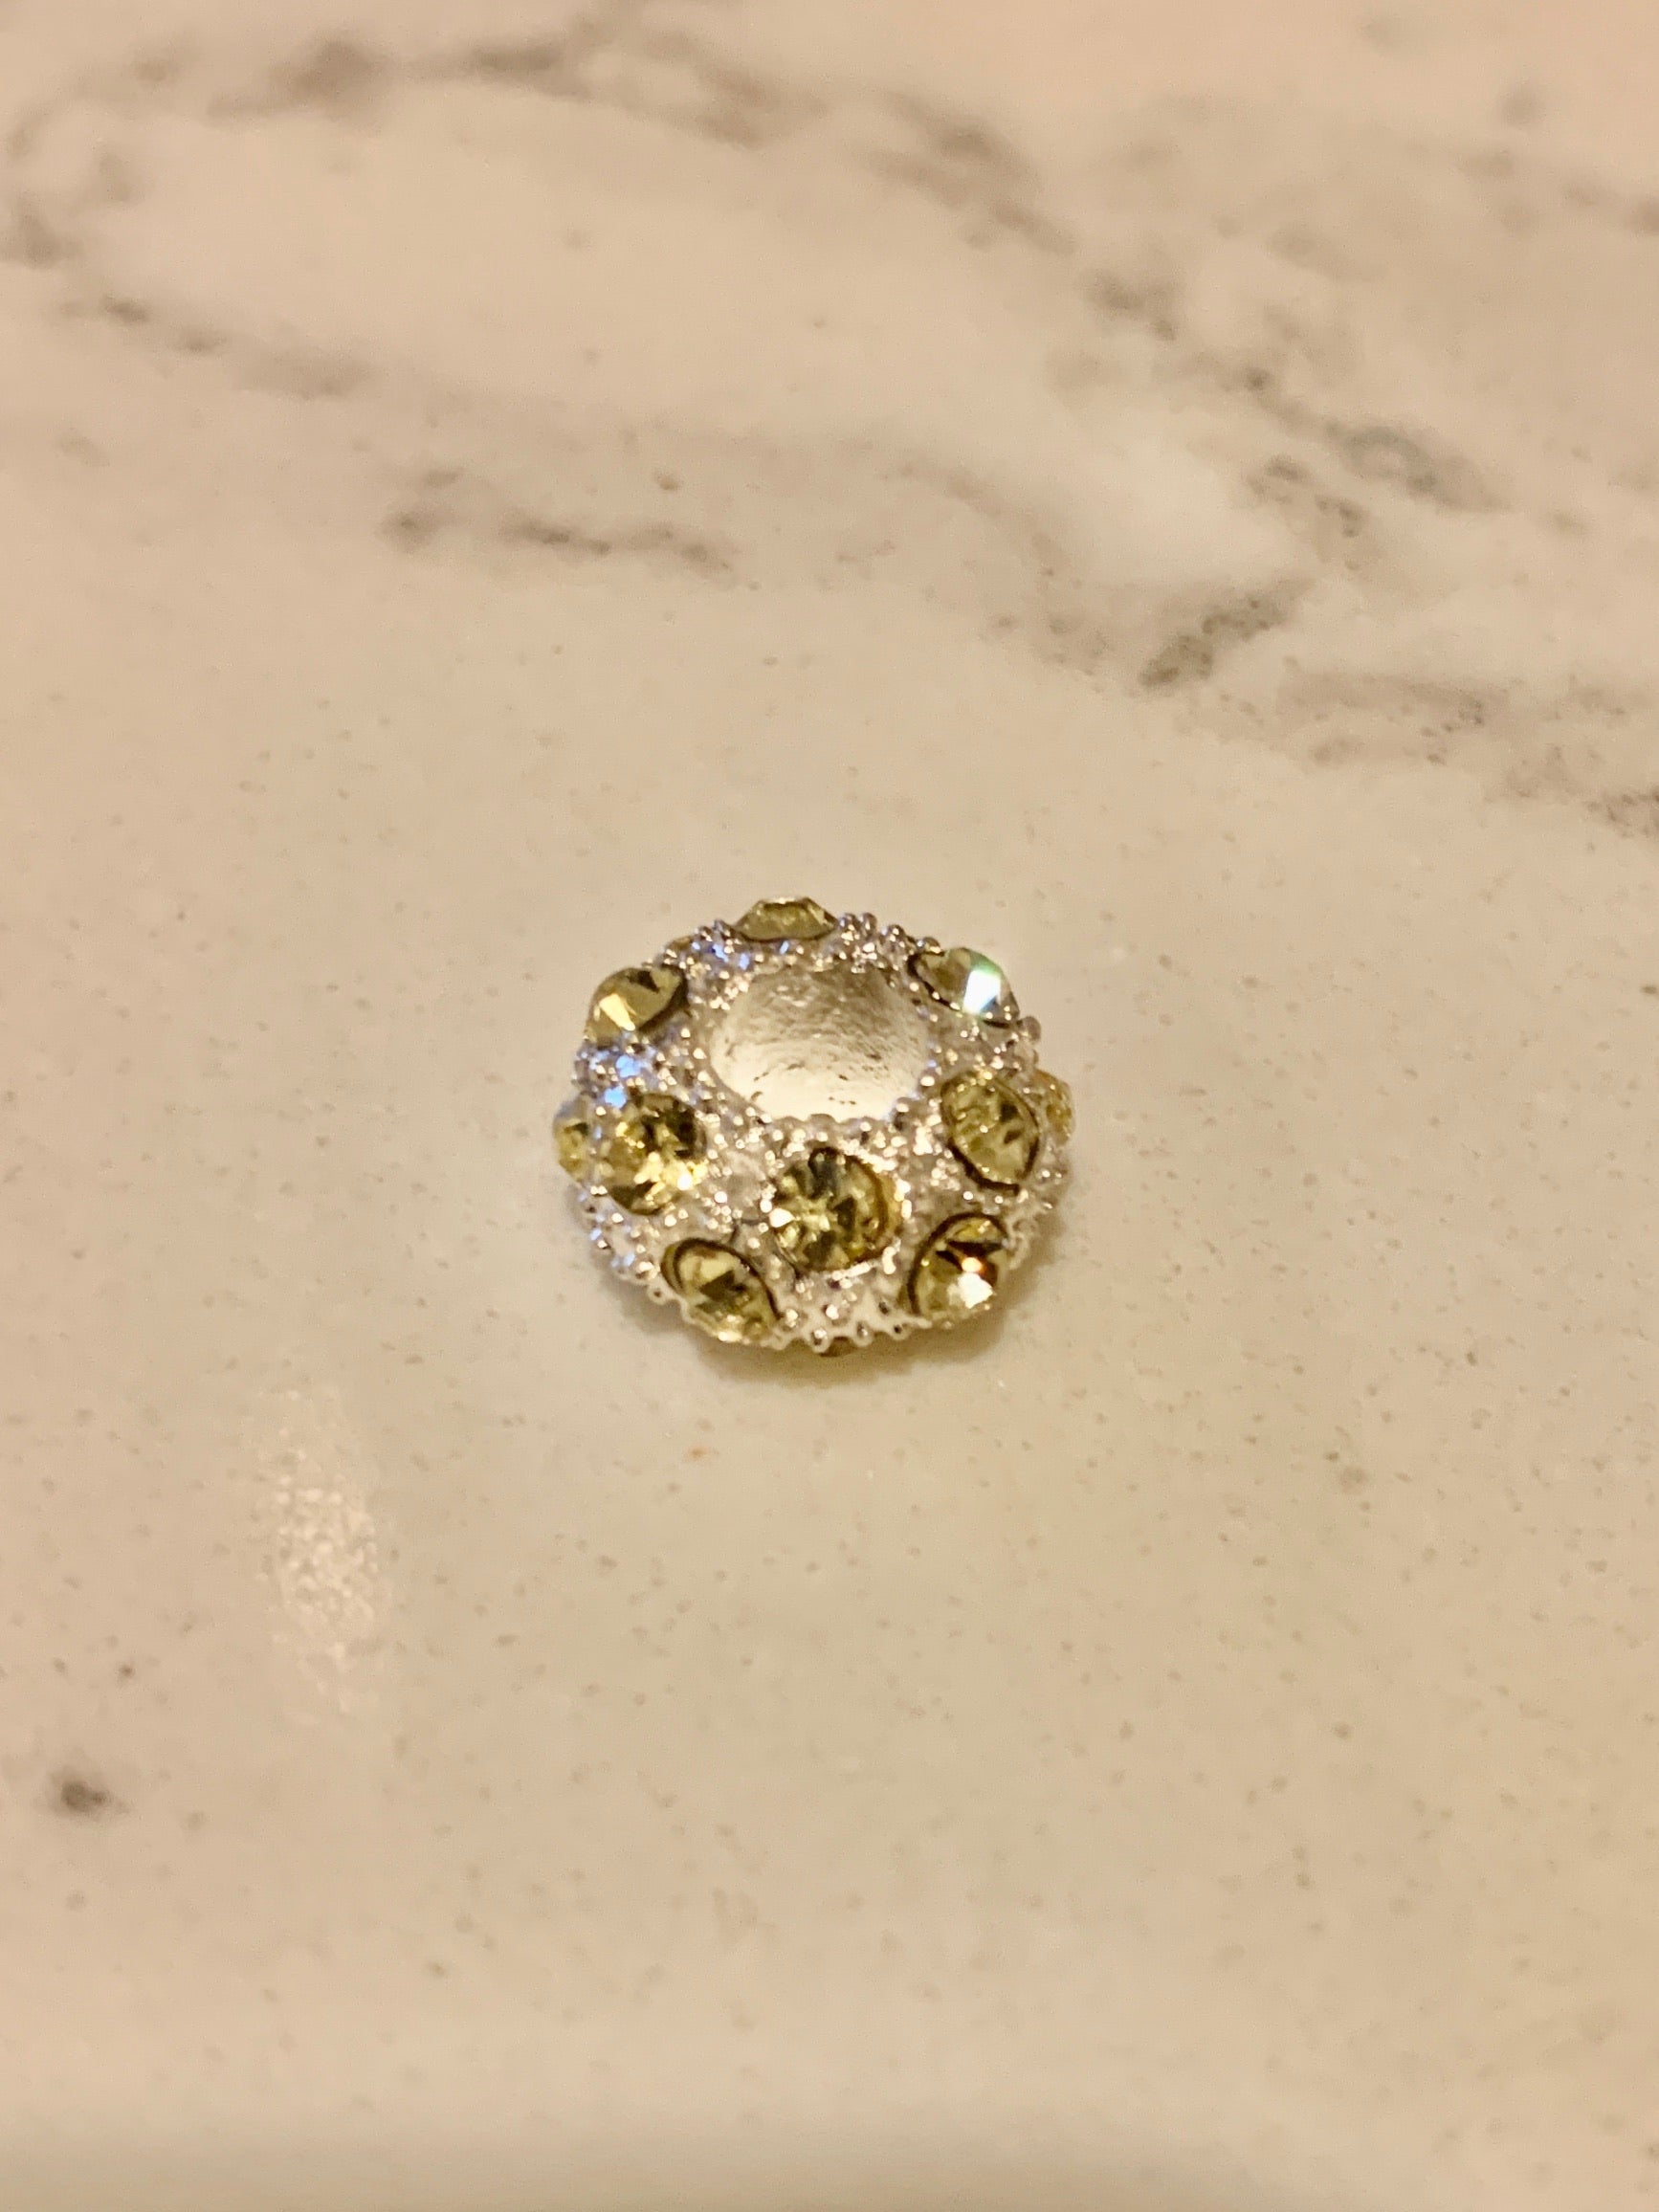 Cz Pave Spacer Charm.